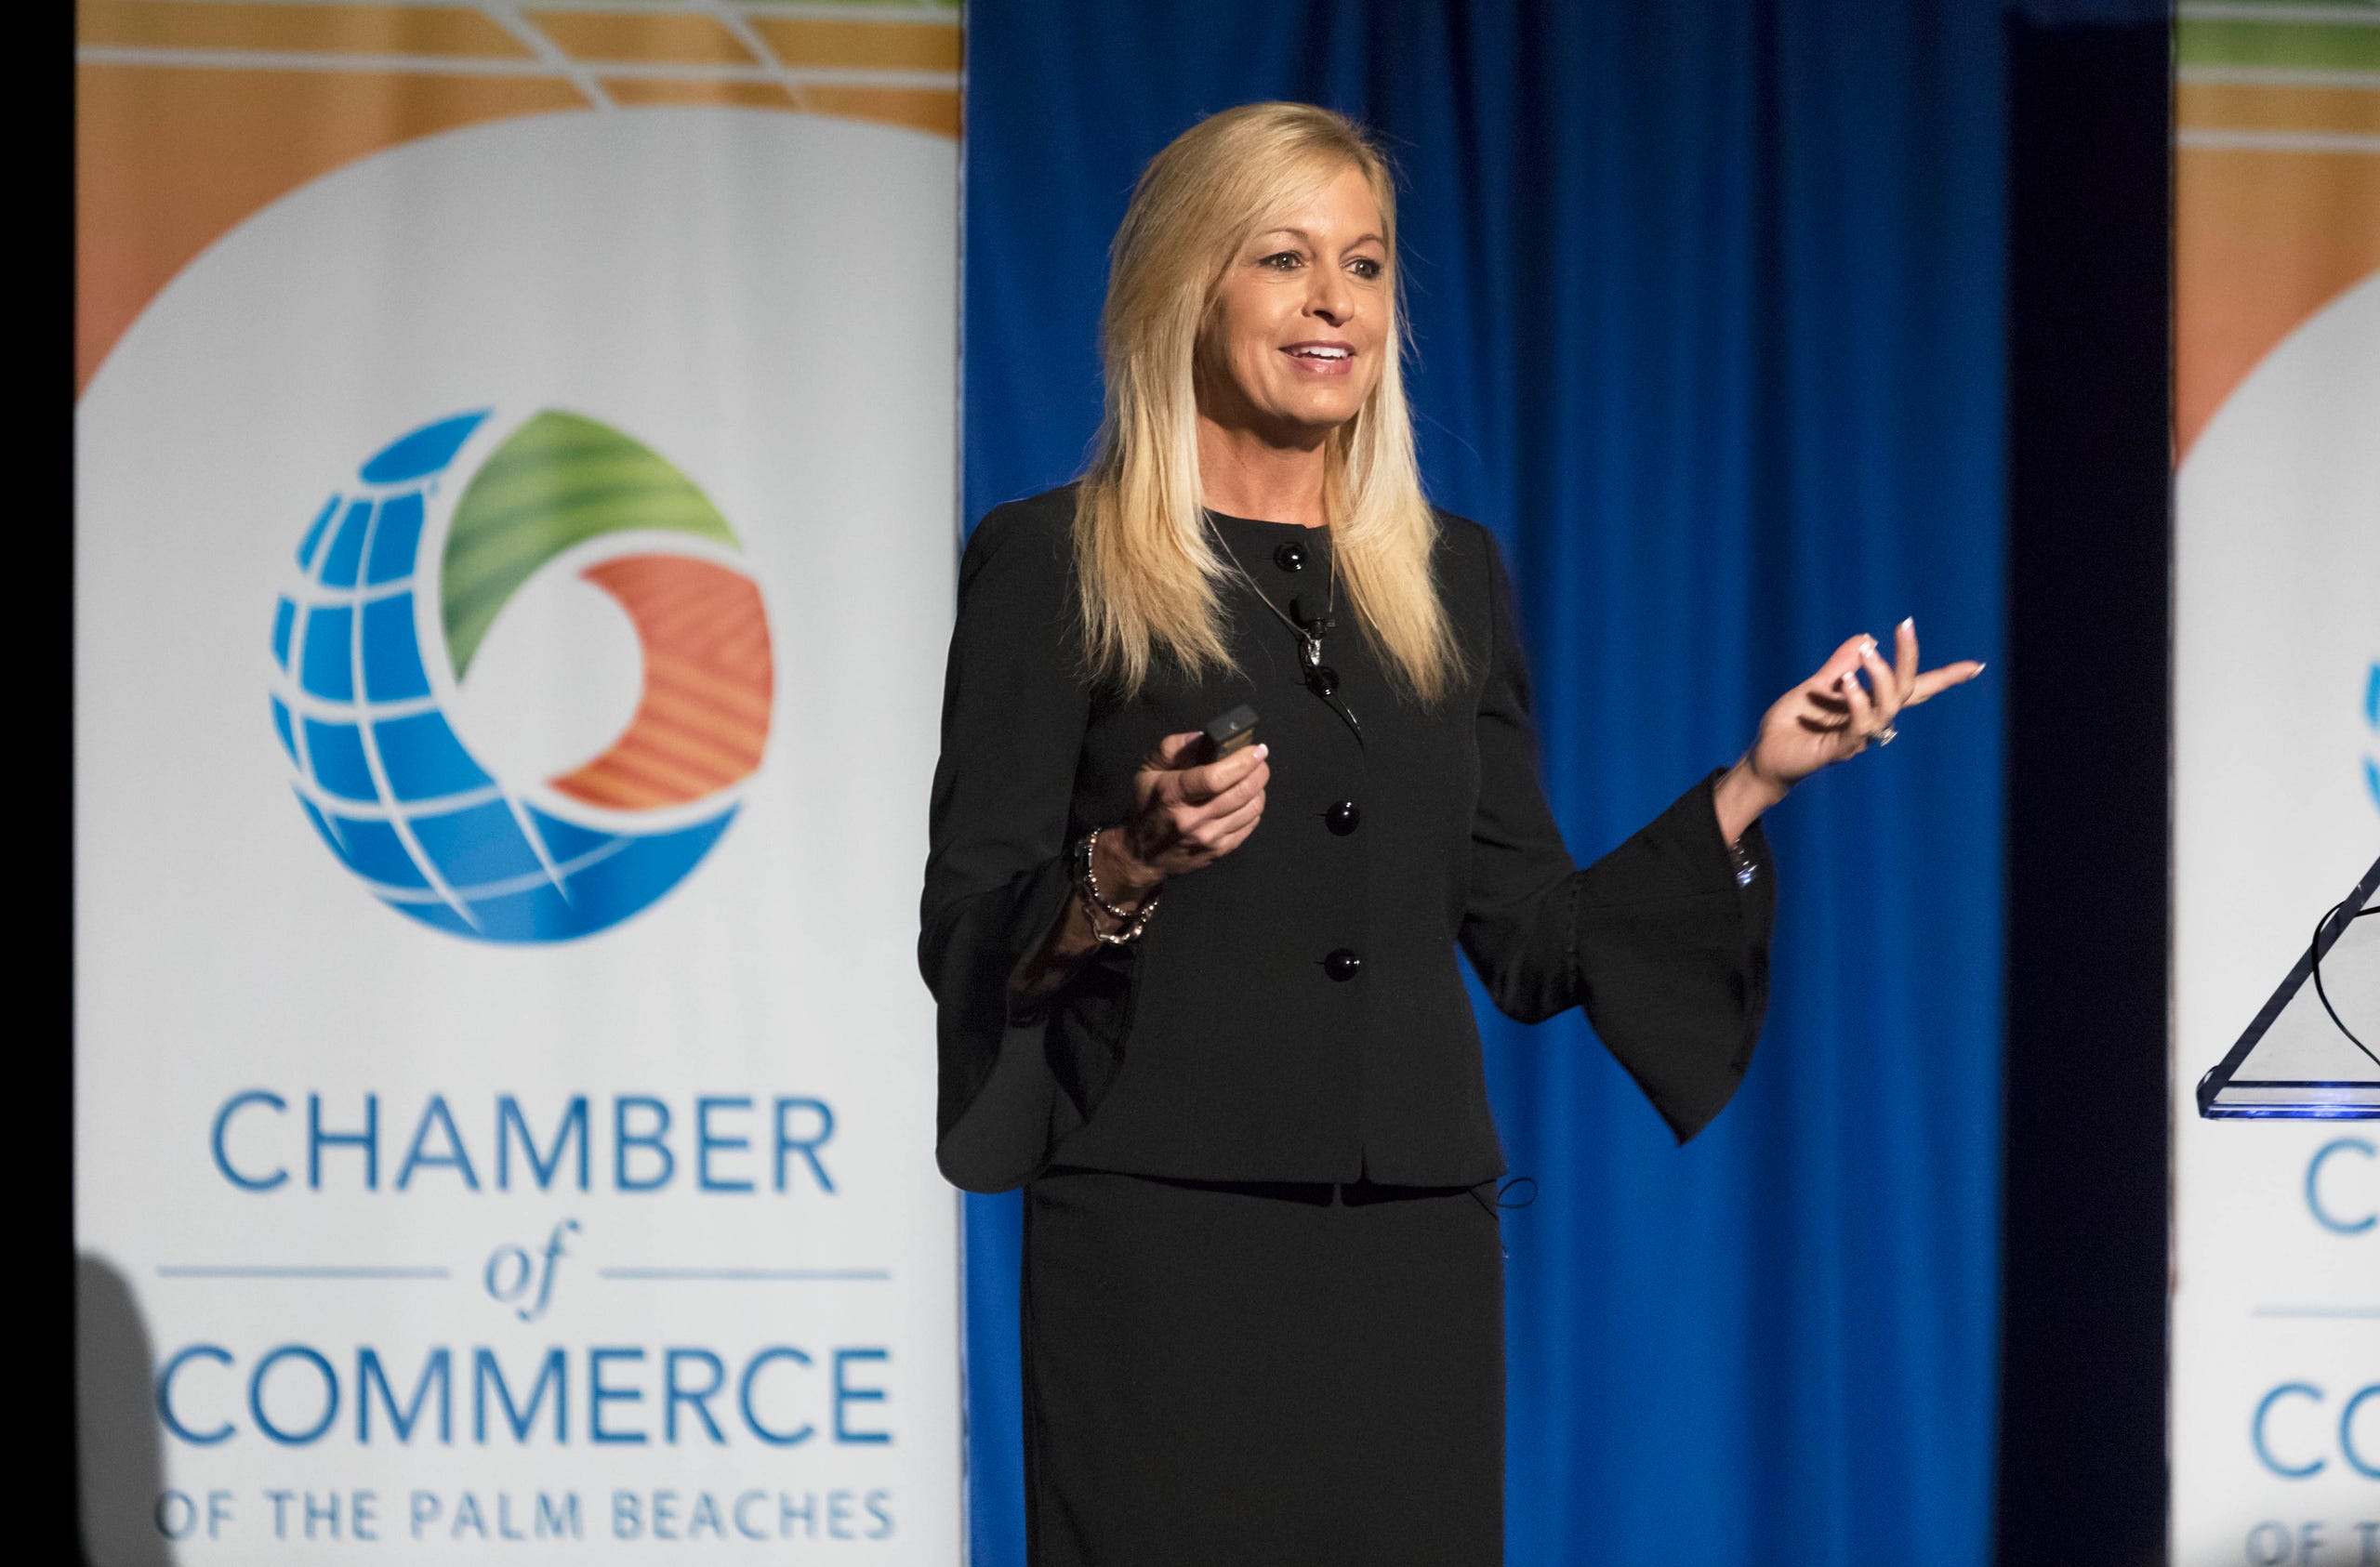 Business Development Board of Palm Beach County President and CEO, Kelly Smallridge speaks during the Chamber of Commerce of the Palm Beaches February breakfast at the Palm Beach County Convention Center on Tuesday, February 26, 2019 in West Palm Beach, Florida. [GREG LOVETT /palmbeachpost.com]